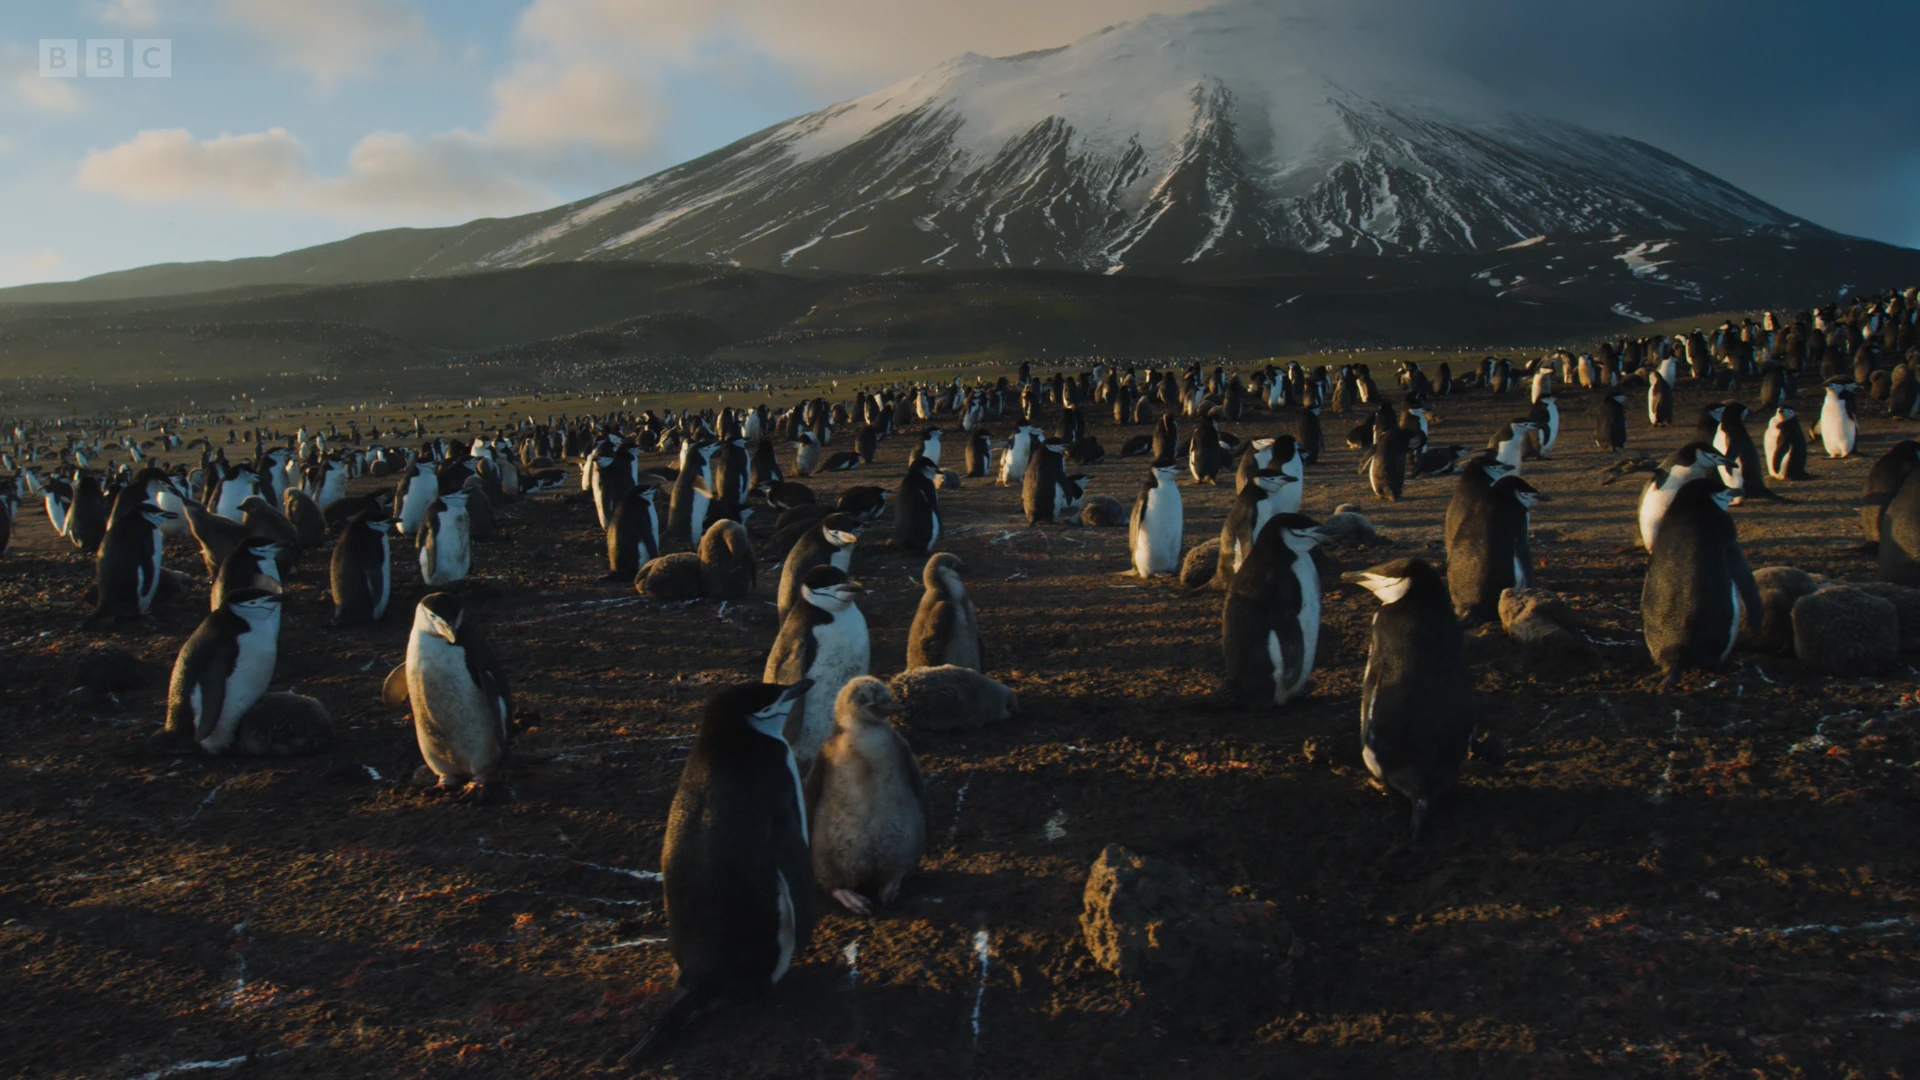 Chinstrap penguin (Pygoscelis antarcticus) as shown in Planet Earth II - Islands